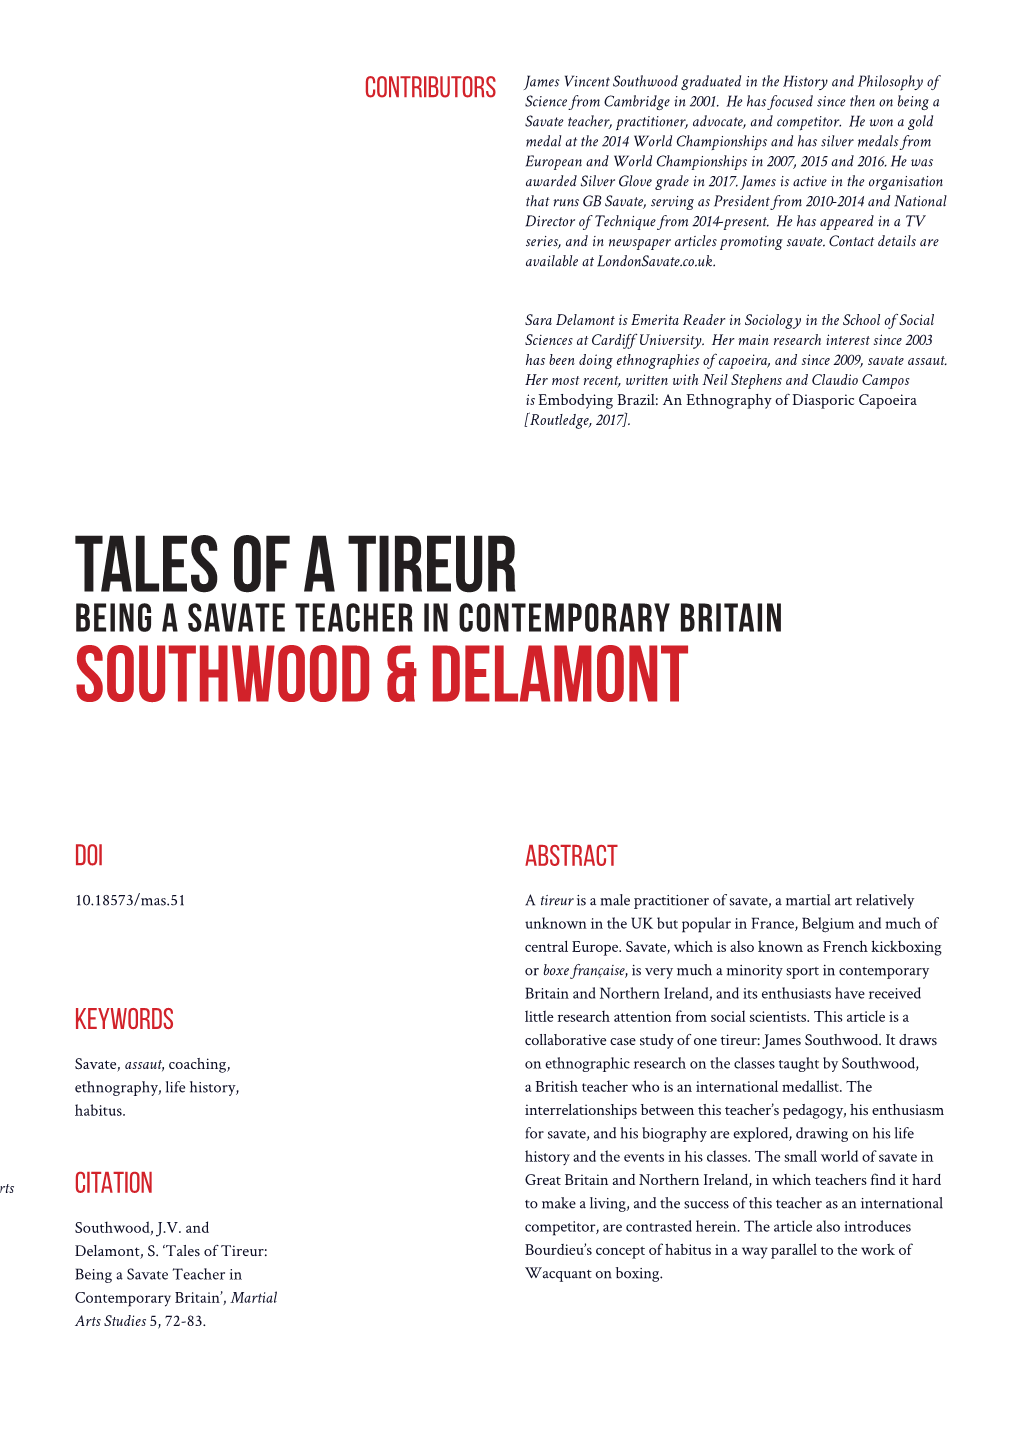 Tales of a Tireur Southwood & Delamont